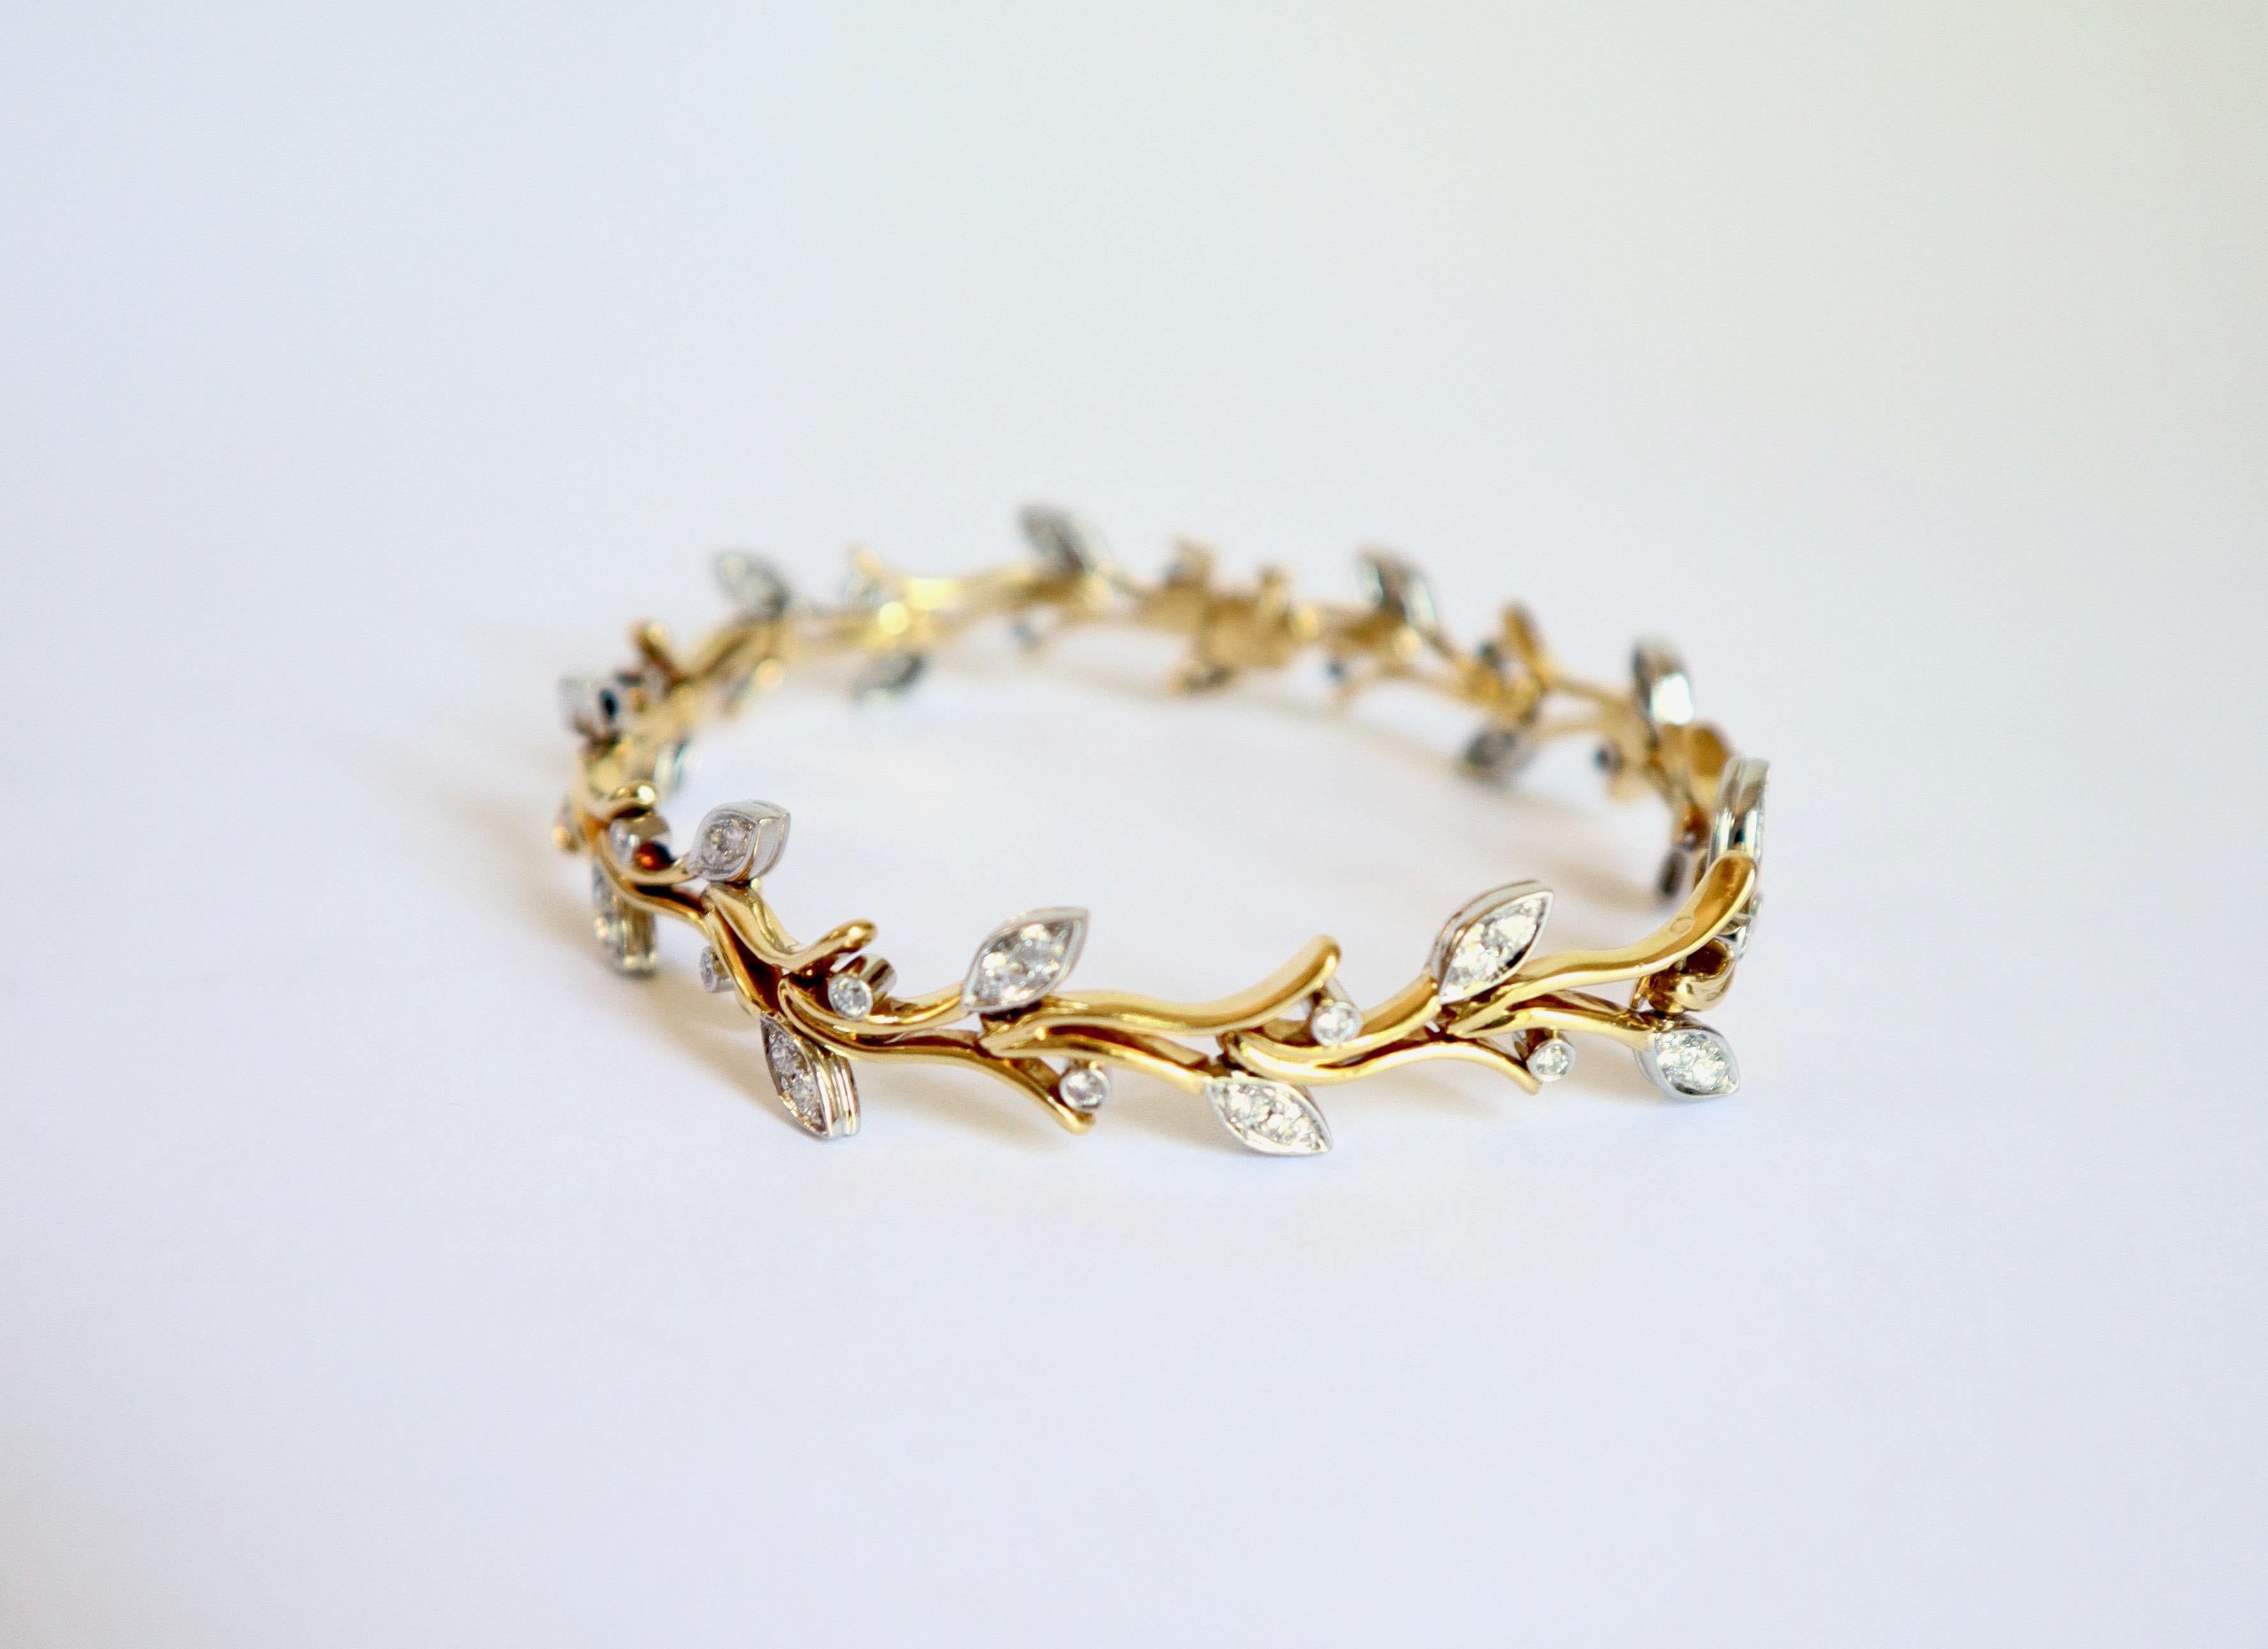 TIFFANY'S Bracelet in 18 Carat yellow Gold, Platinum and Diamonds, Twig Shape
18 Diamond-set Leafs motifs. 
The Bracelet is signed Tyffany's  and dated 1999
Gross weight: 25,2g
Length 17.5 cm
Width 1cm